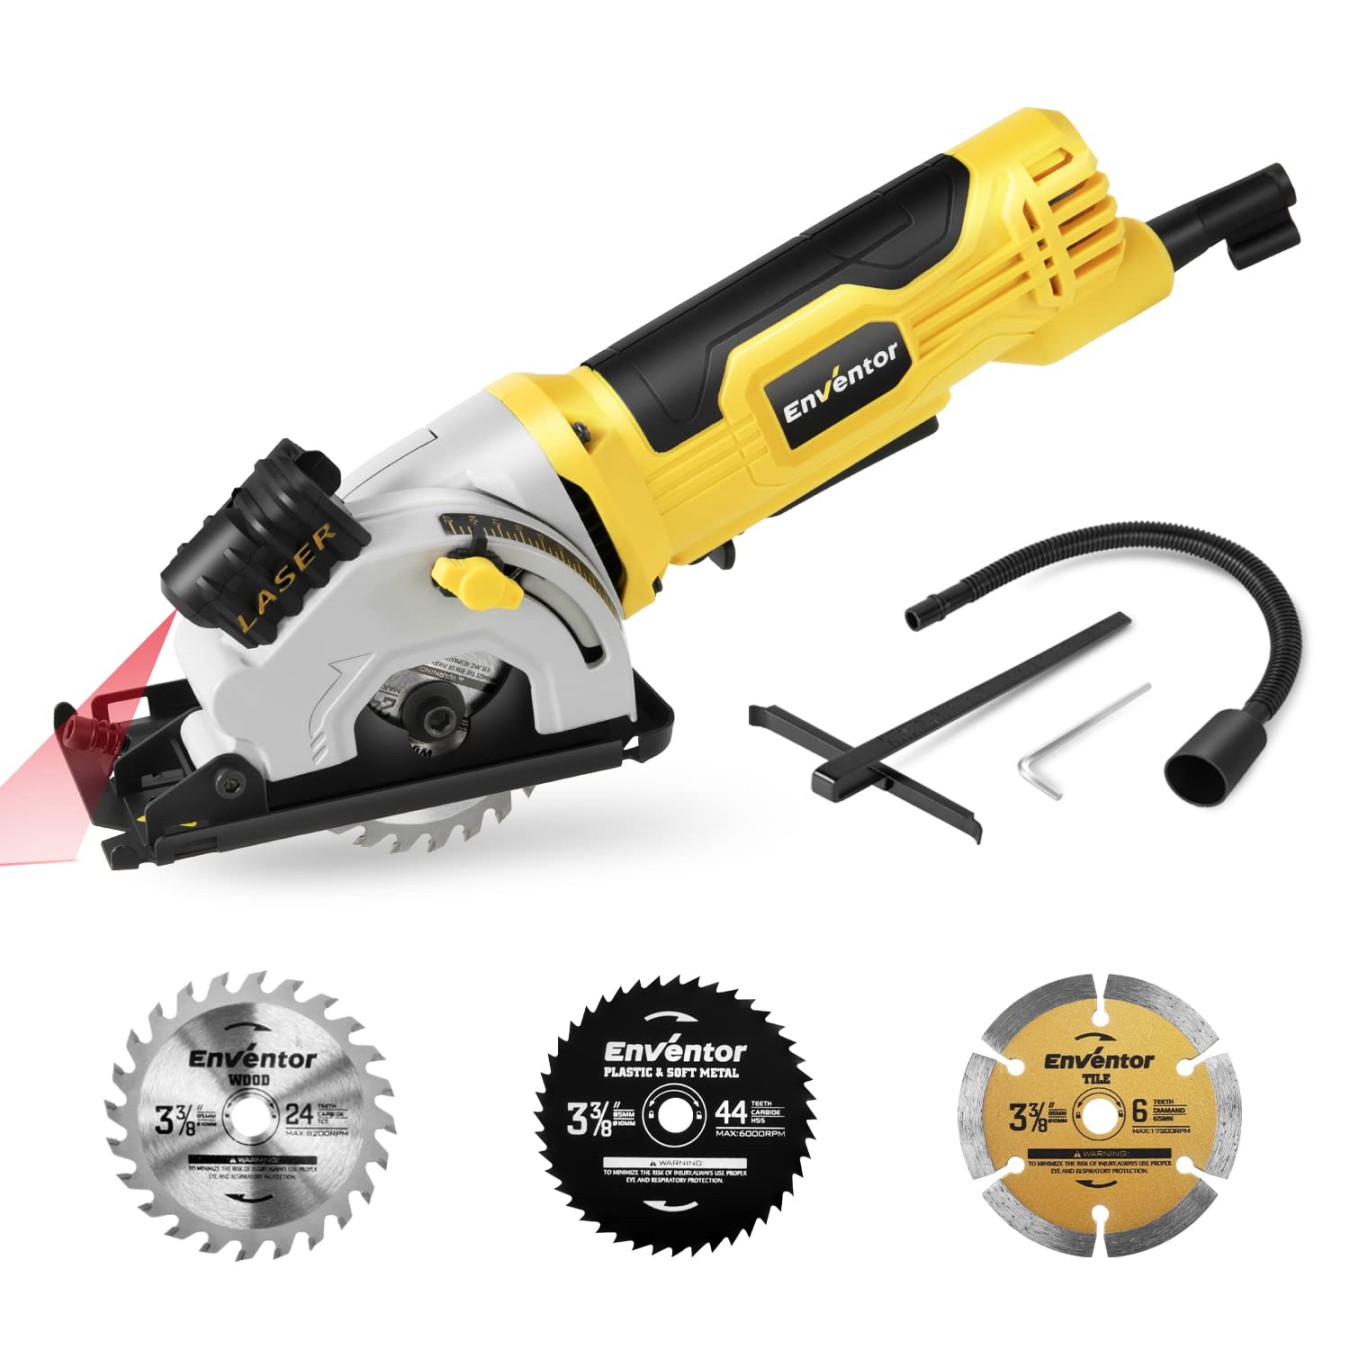 mini-circular-saw-enventor-w-handheld-circular-saw-with-saw-blades-with-guide-rail-and-laser-guide-rpm-ideal-for-wood-soft-metal Miniature Circular Saw Review: Big Performance In A Small Package picture